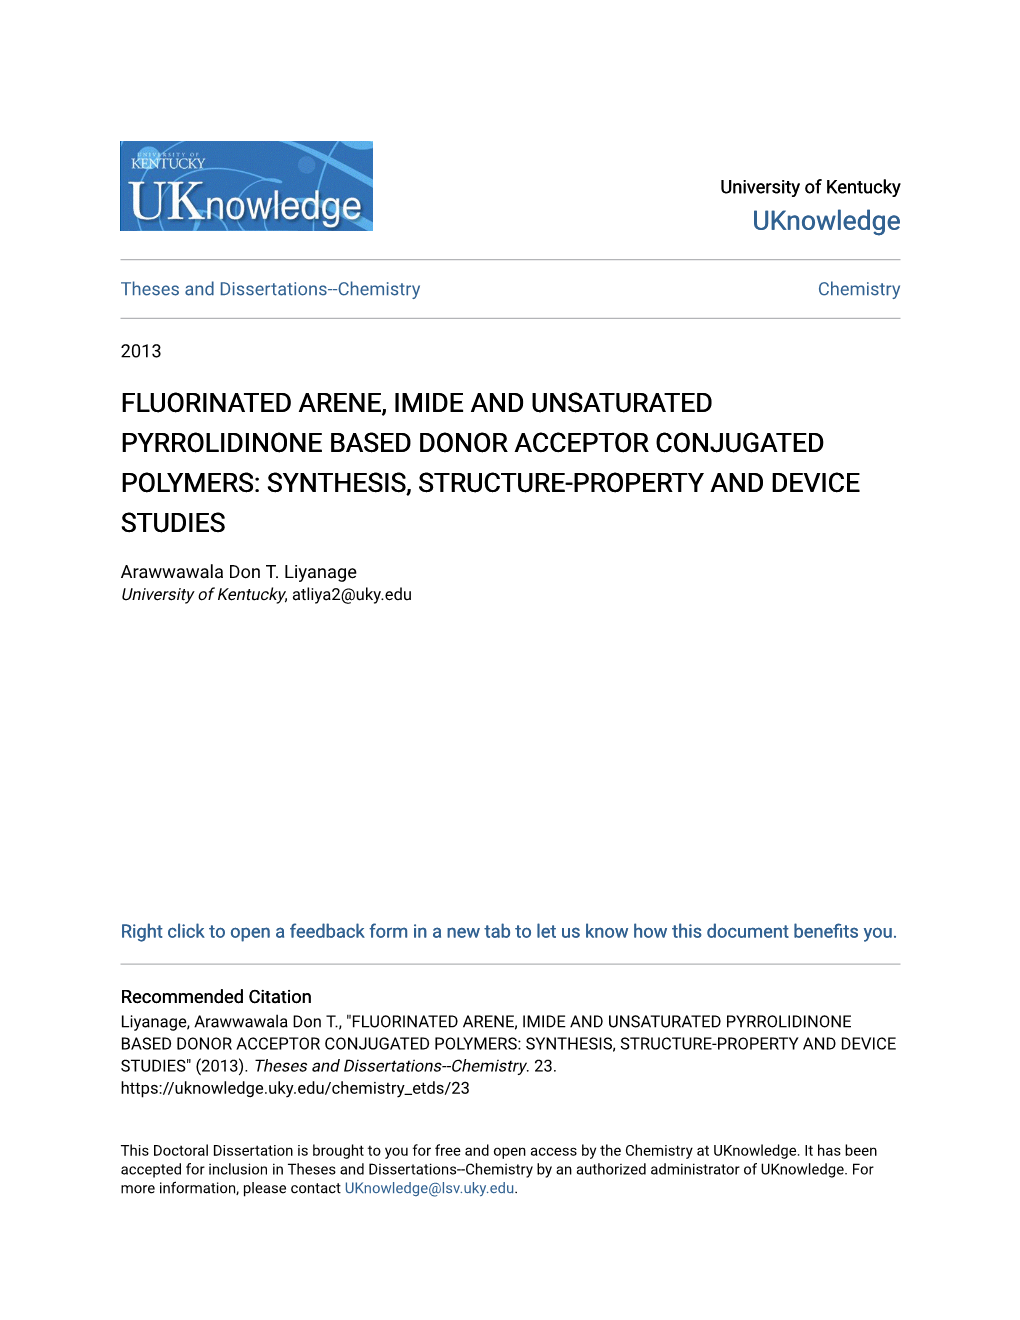 Synthesis, Structure-Property and Device Studies